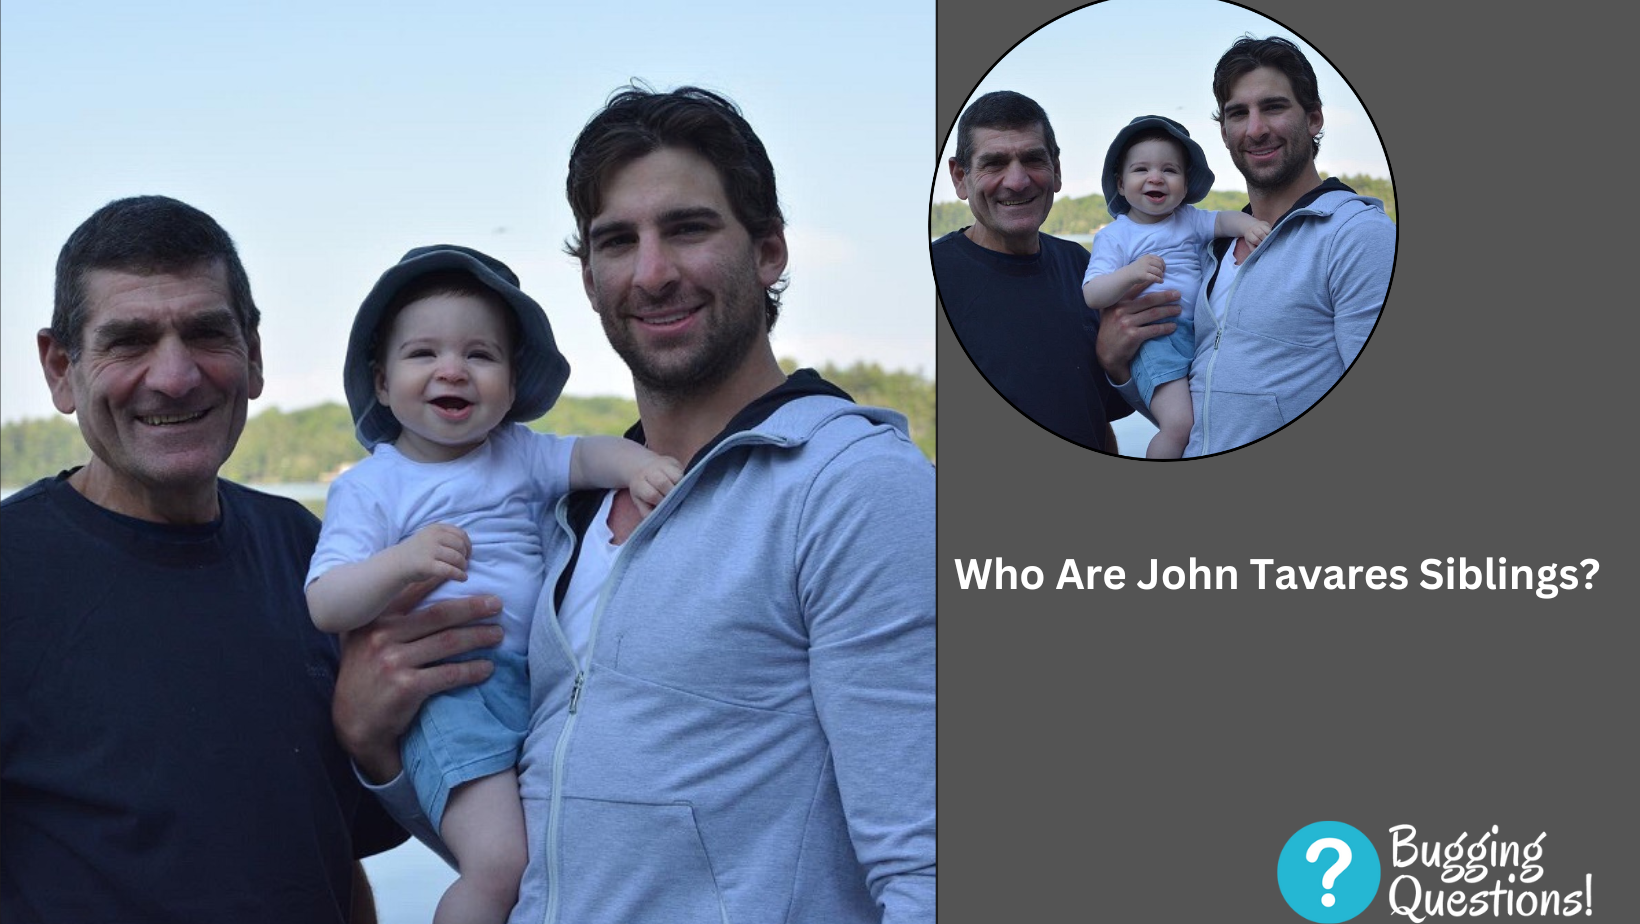 Who Are John Tavares Siblings?